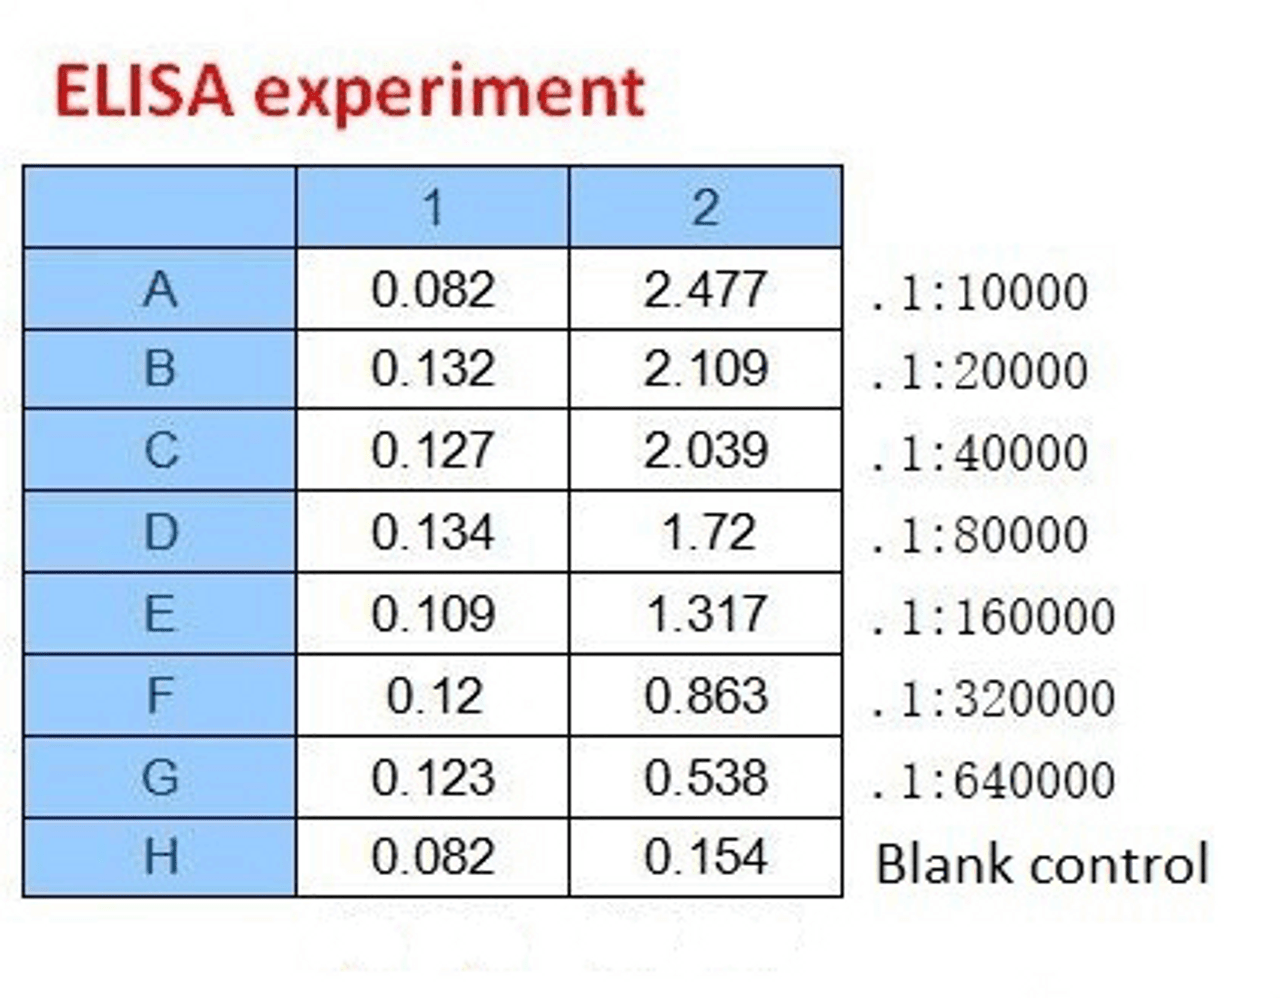 <strong>Figure 2 ELISA Test</strong><br>
Coating original concentration: 2 ug/mL, 100 uL/well samples are column 1: SARS-CoV-2 (COVID-19) Spike-RBD Recombinant Protein, 10-008, and column 2: SARS-CoV-2 (COVID-19) Spike-ECD Recombinant Protein, 10-011.<br>Antibodies: SARS-CoV-2 (COVID-19) Spike-ECD Monoclonal Antibody, 10-563.<br>Secondary: Goat anti-human IgG HRP conjugate at 1:10000 dilution.<br>Develop: 15min, 100 uL/well.<br>Stop: Stop buffer 50 uL/well.<br>10-563 doesn't react with 10-008.